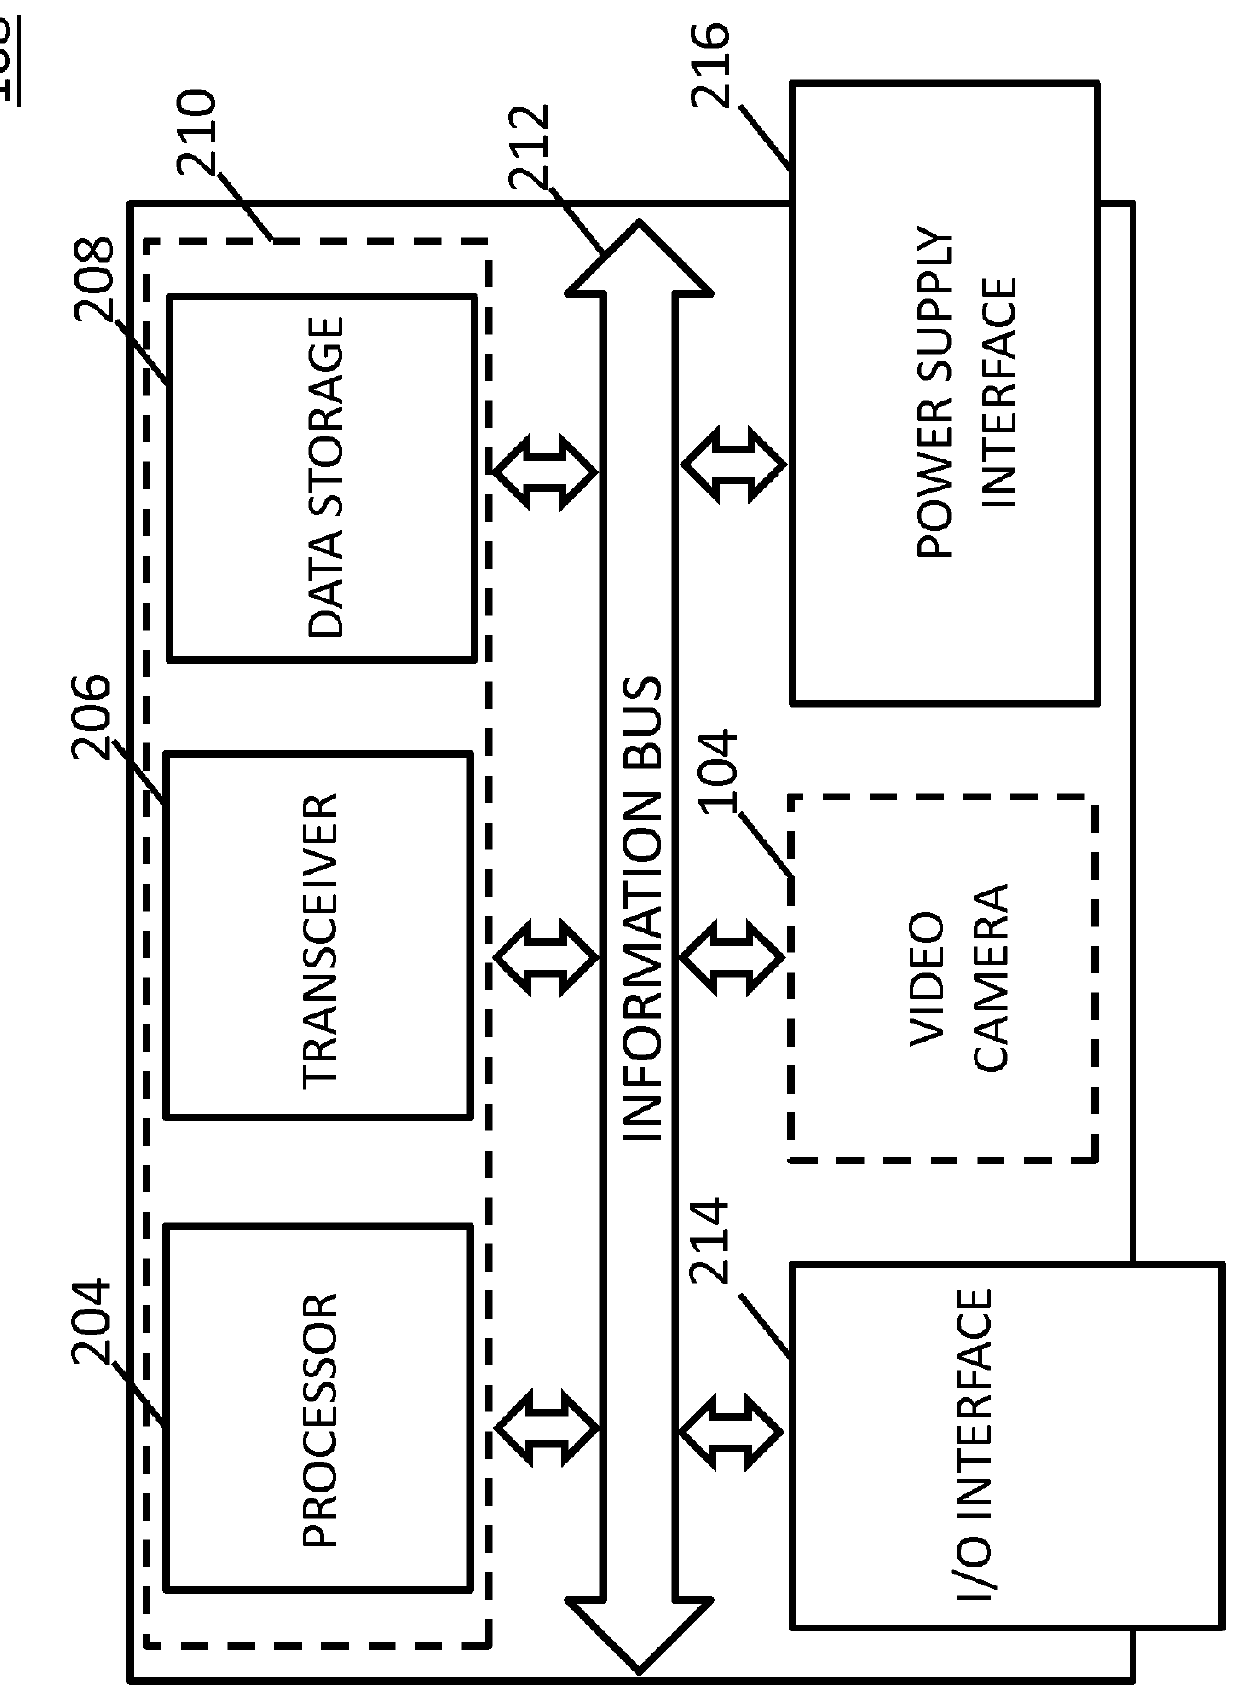 Devices, systems and methods for tracking and auditing shipment items